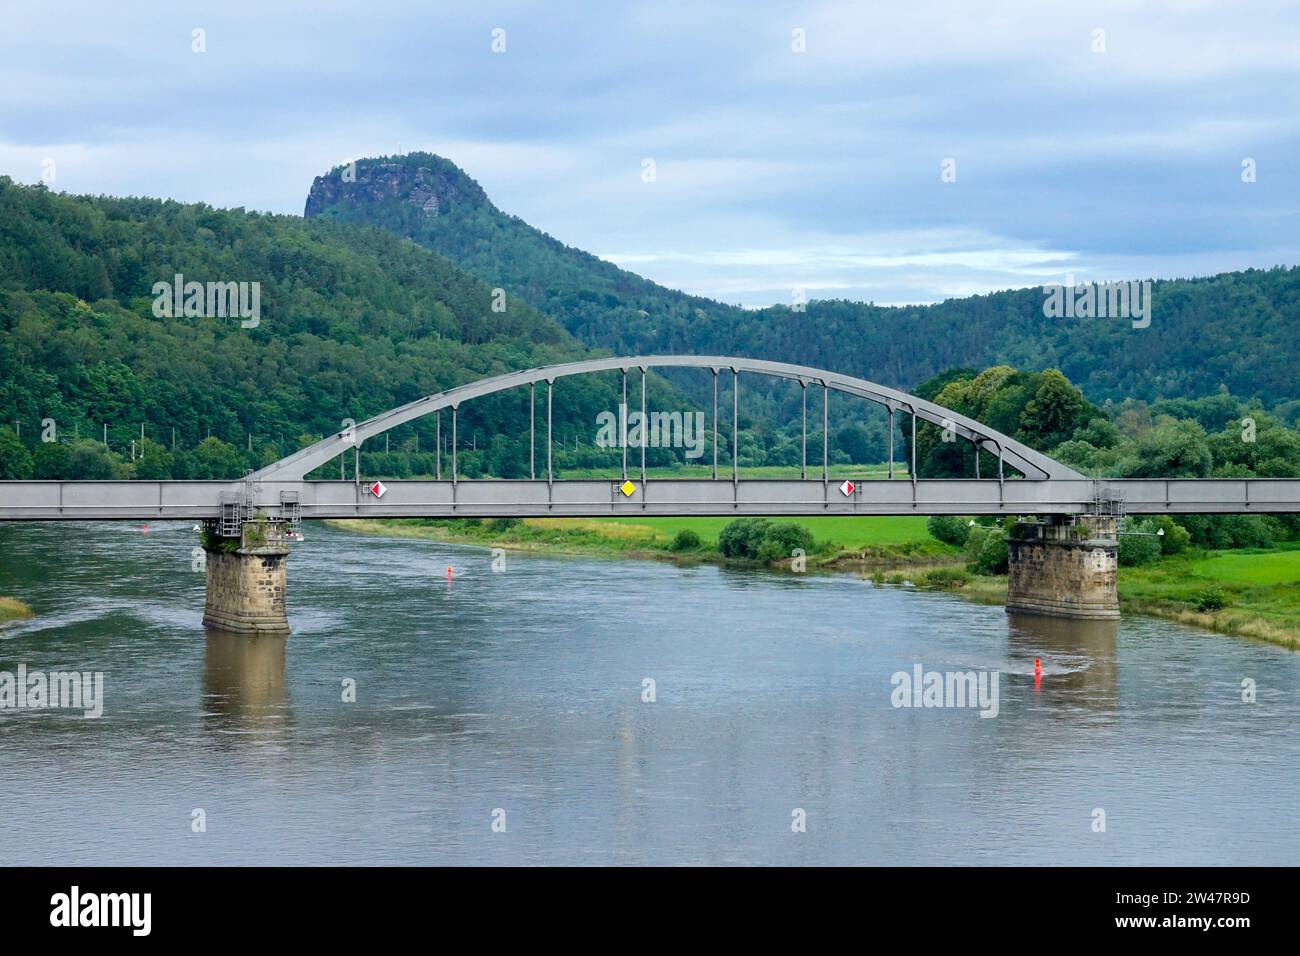 Arched steel railway bridge in the Elbe river valley, Lilienstein mountain in the background Stock Photo